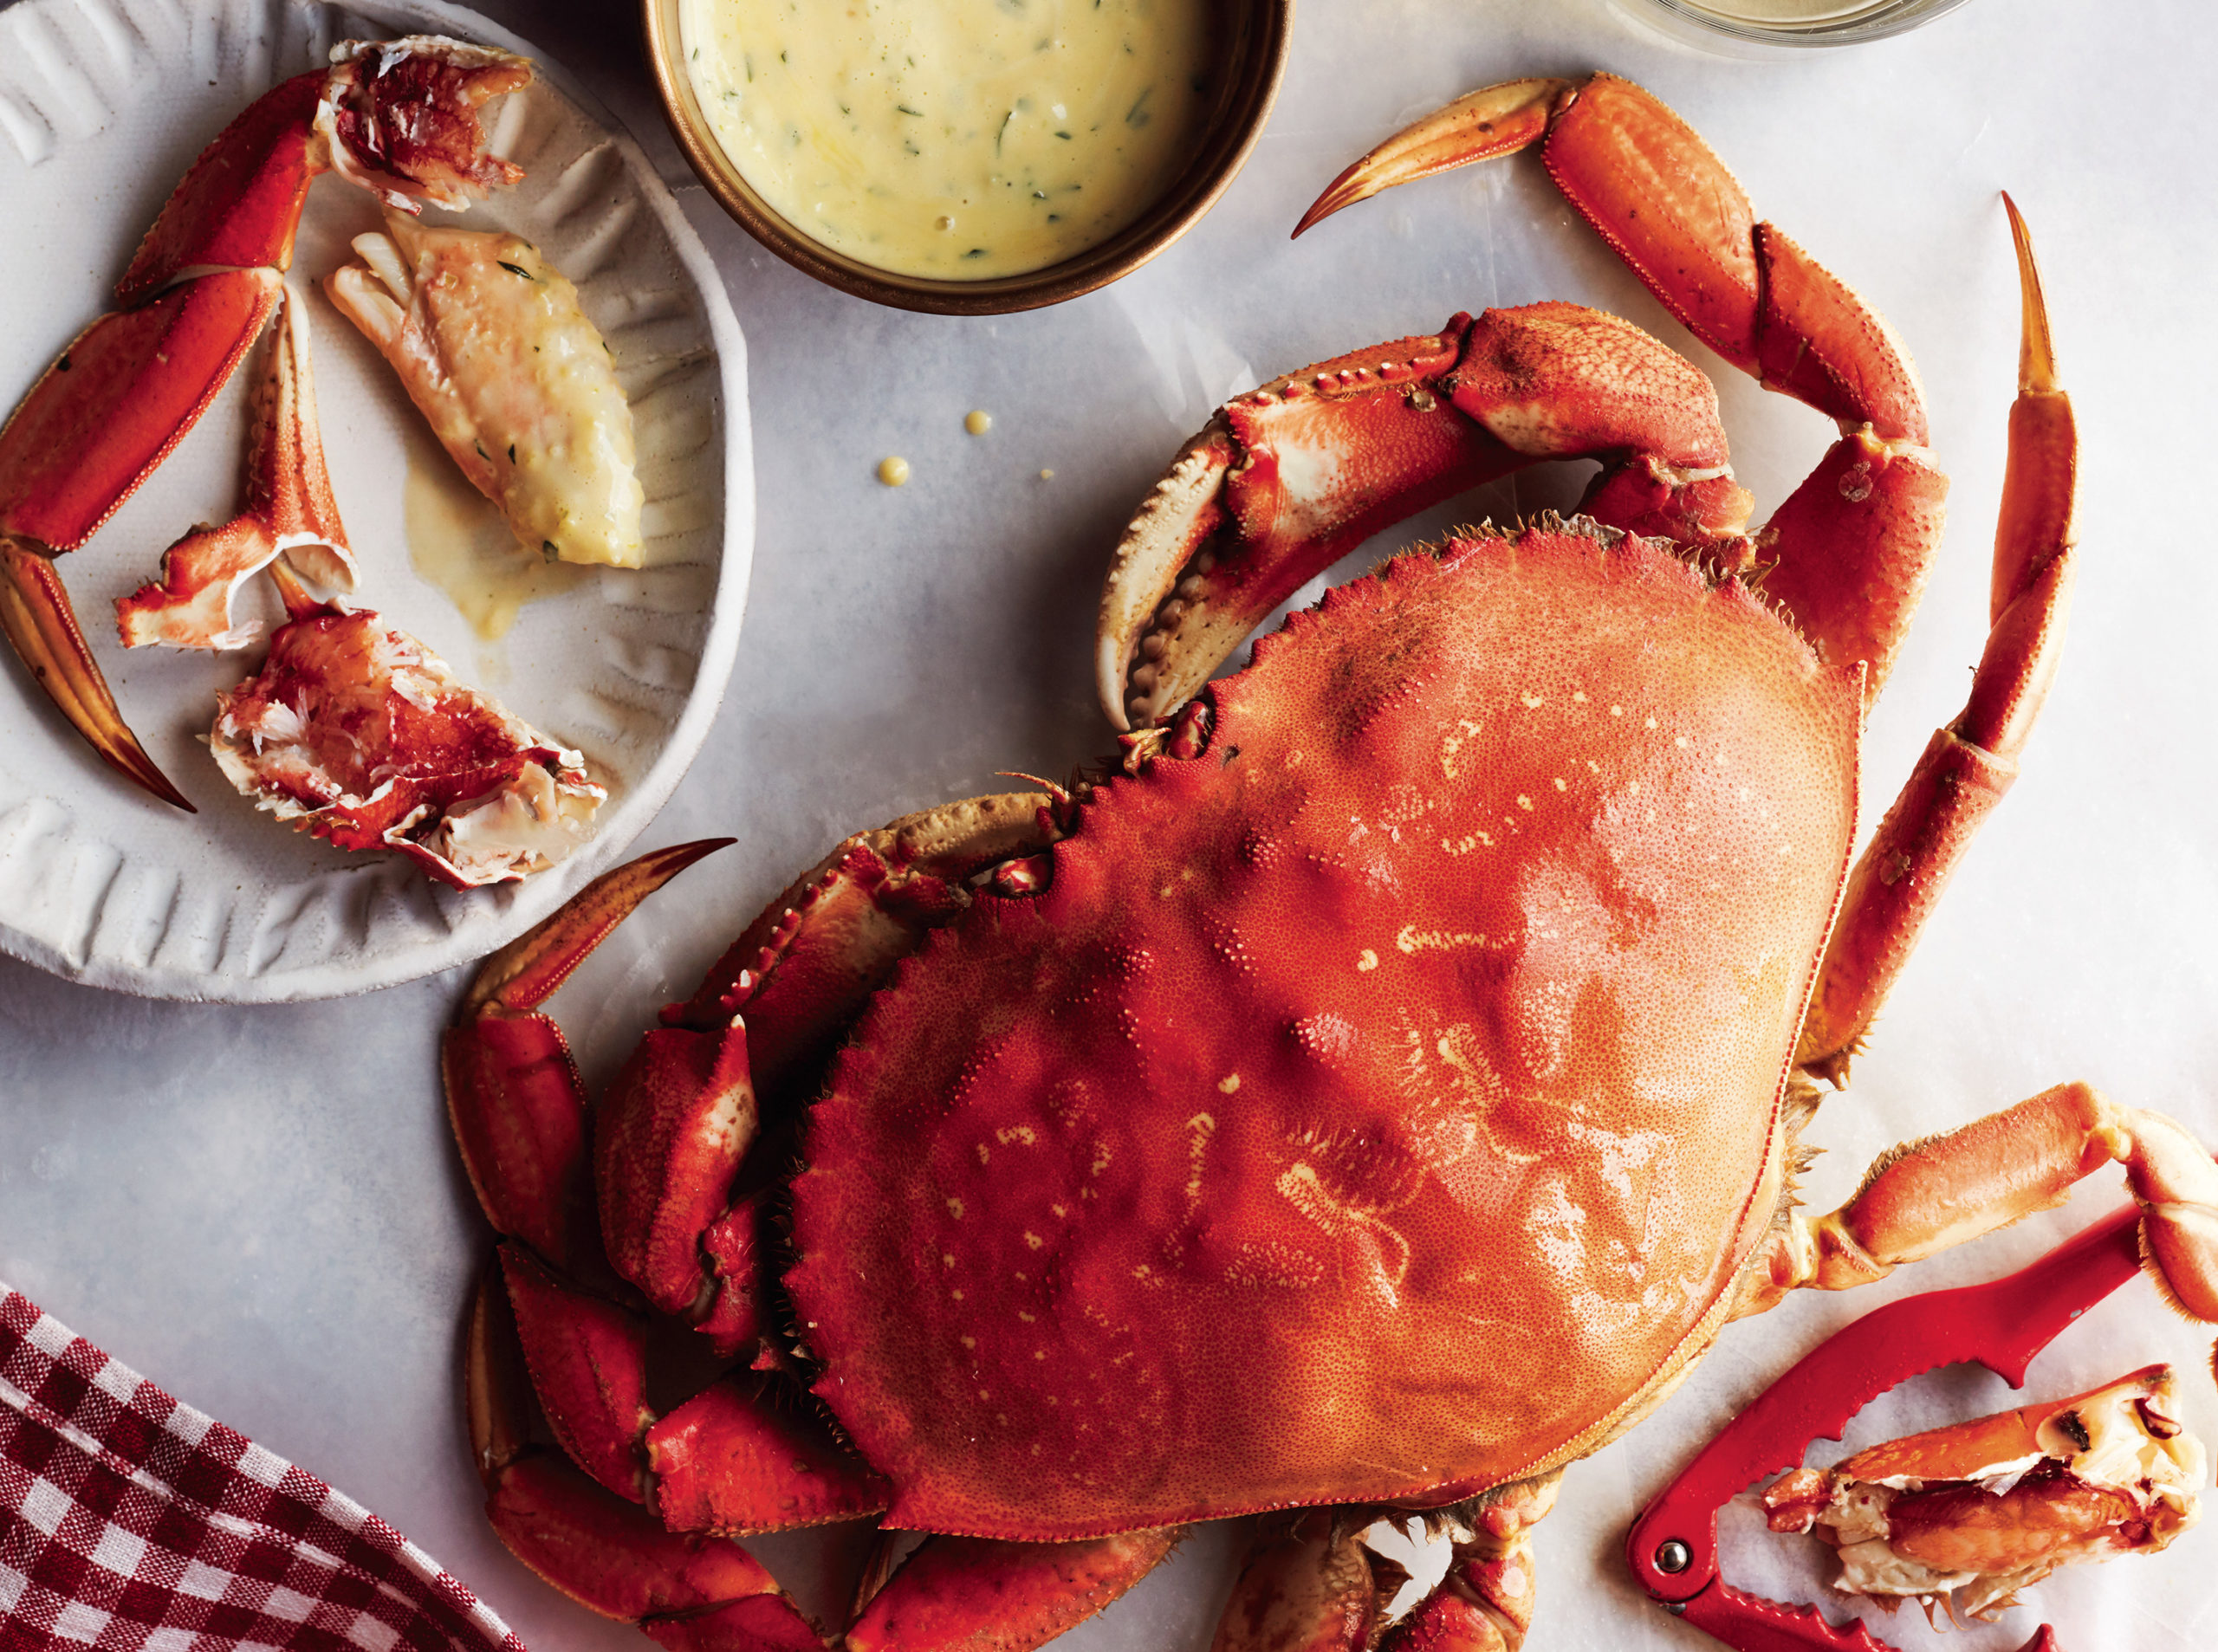 Crab and seafood